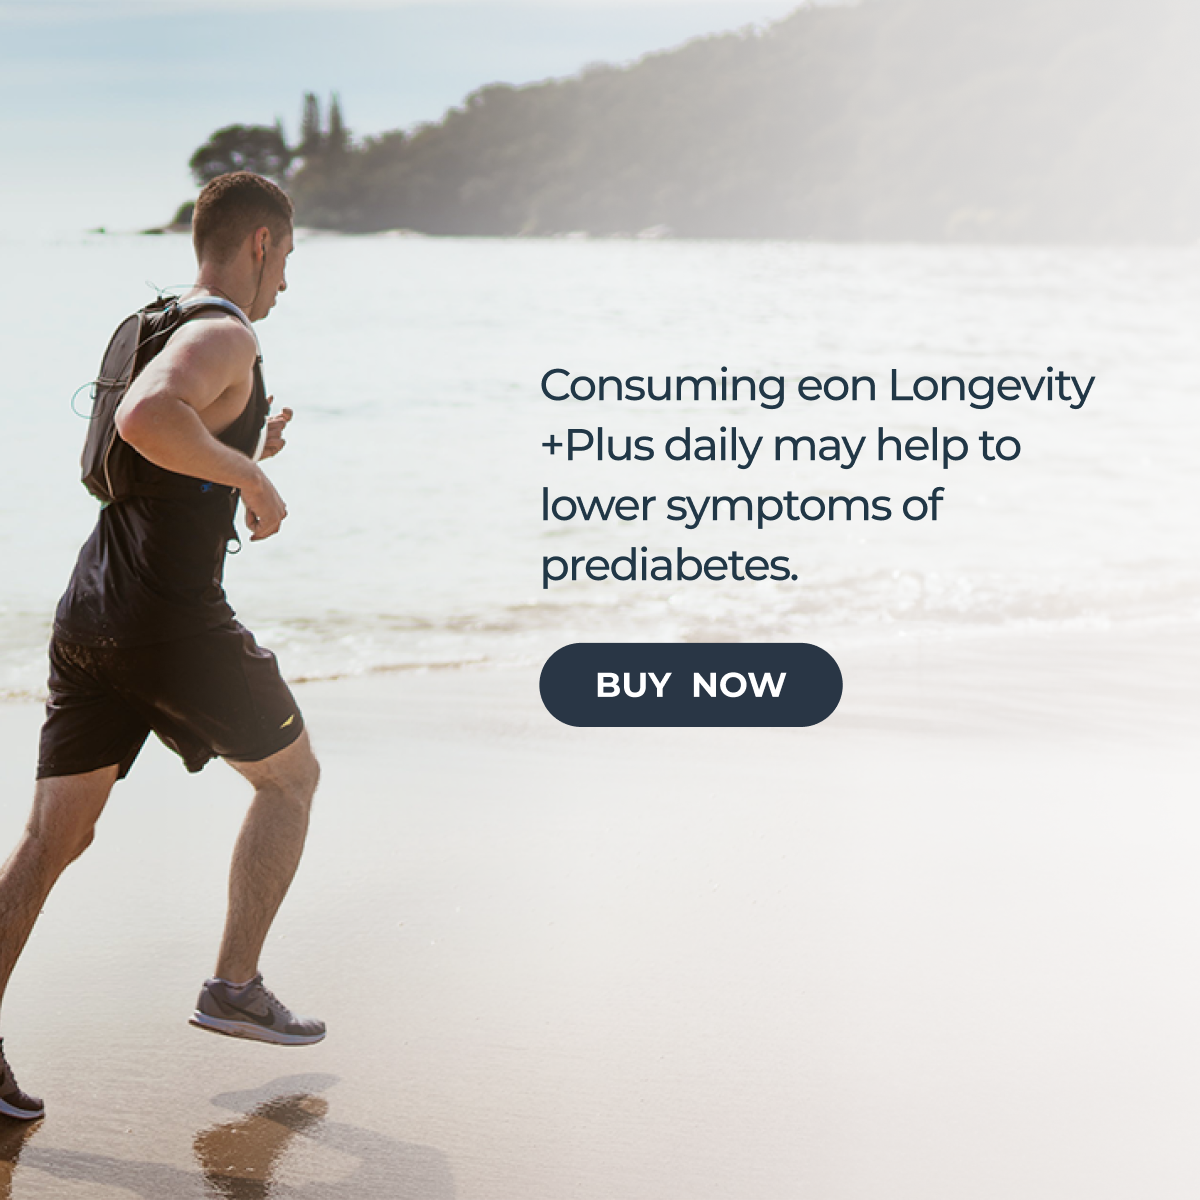 Consuming eon Longevity +Plus daily can help to lower your risk of prediabetes. Buy Now.